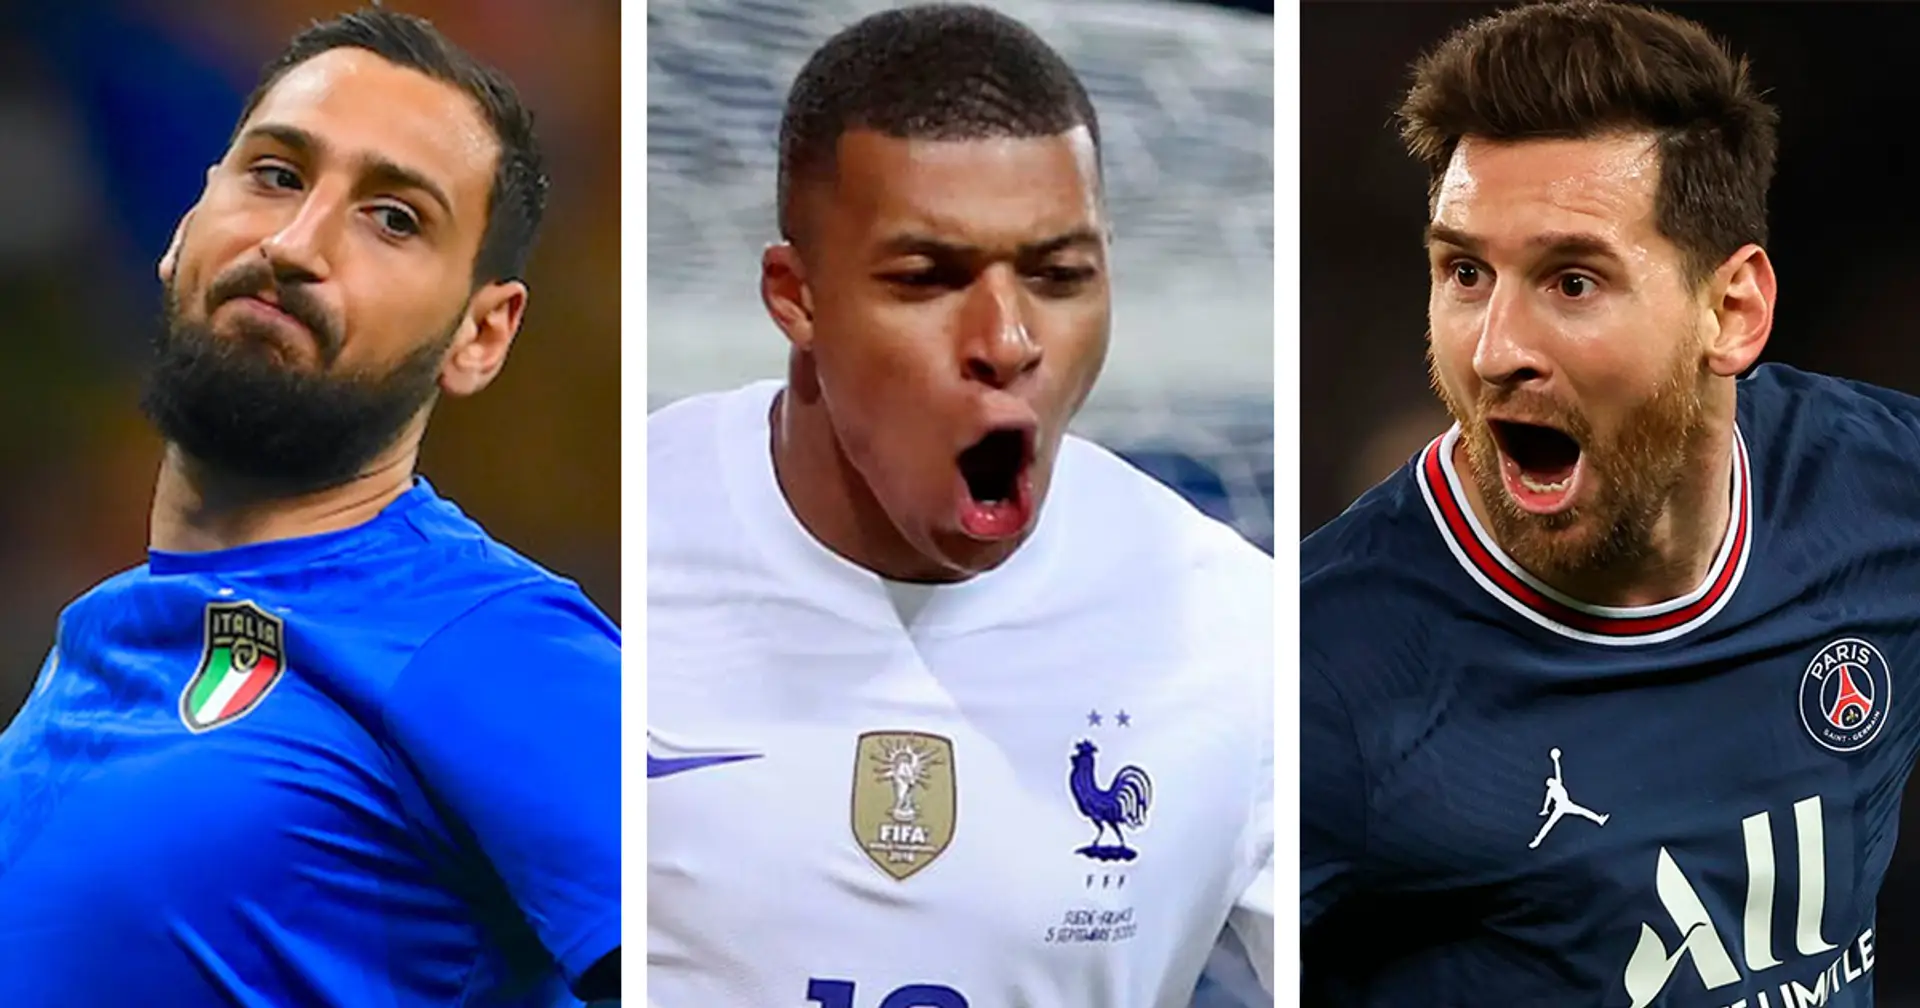 Mbappe scores as France beat Belgium and 2 more big stories you might've missed